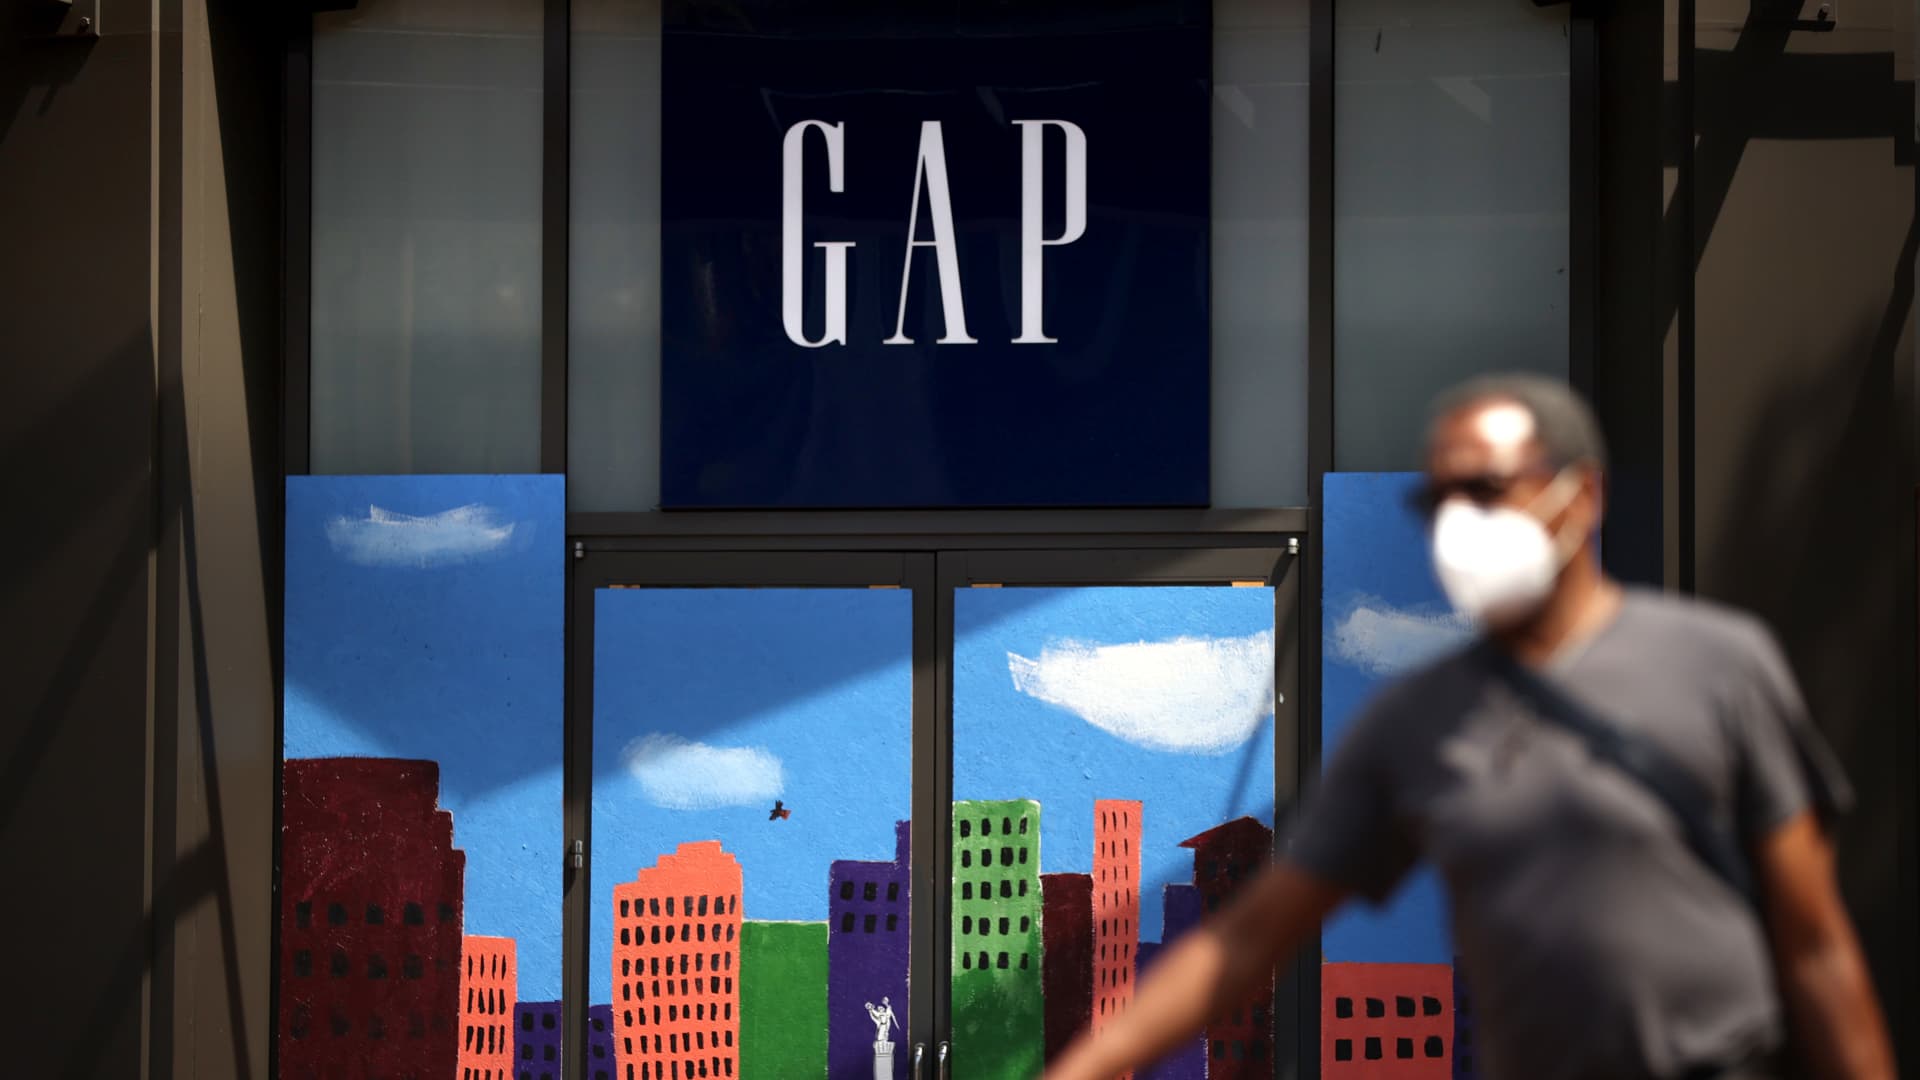 A pedestrian walks by the closed GAP flagship store on August 18, 2020 in San Francisco, California.